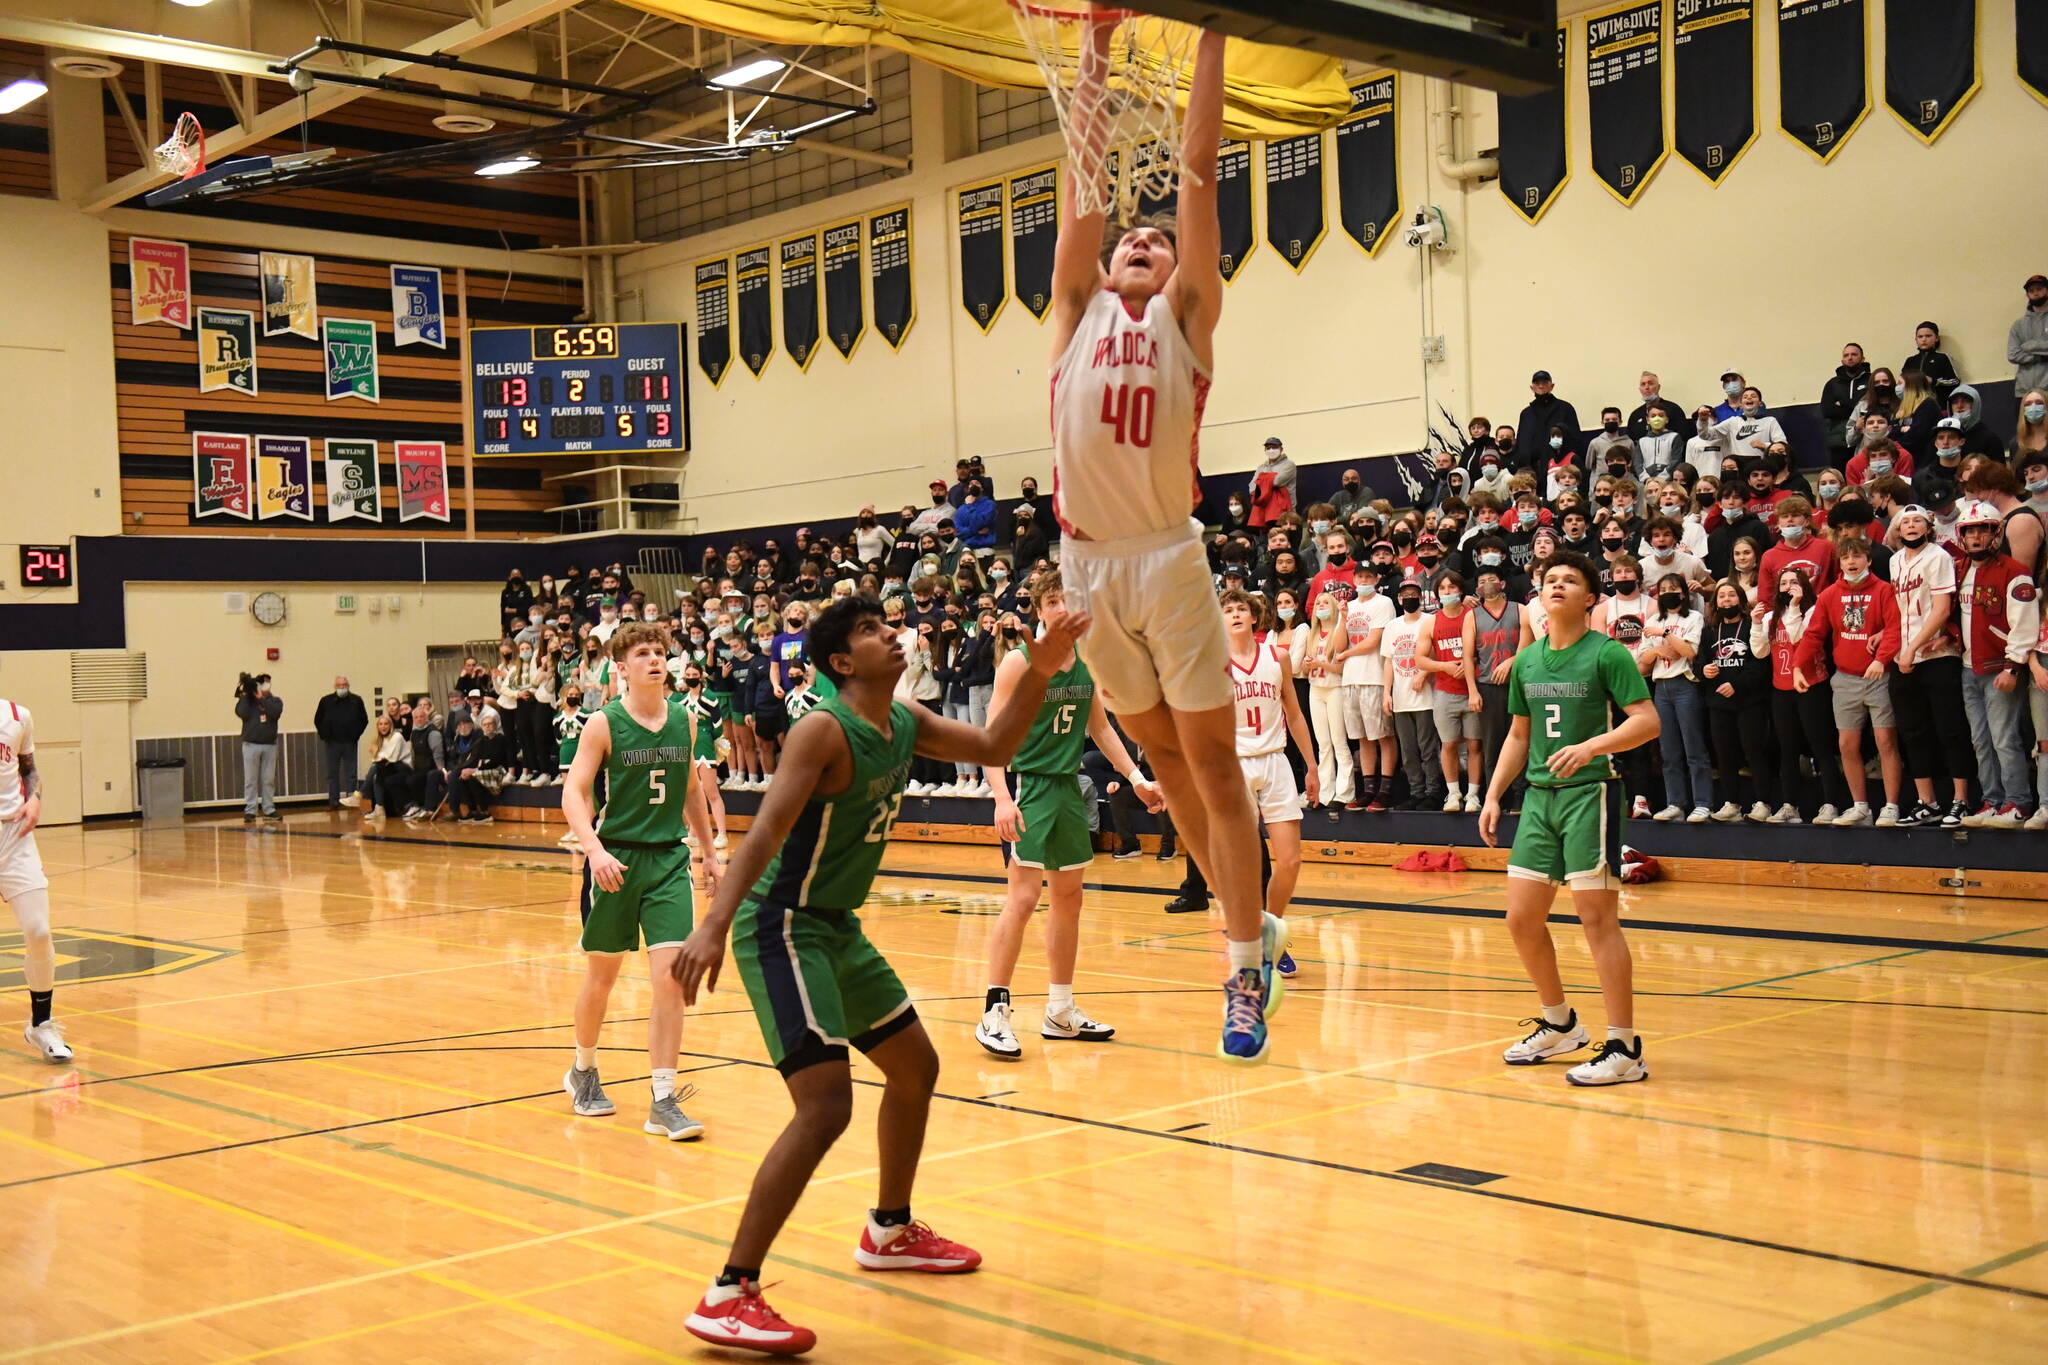 Photo Courtesy of Calder Productions
Senior forward Miles Heide goes for a dunk in the KingCo Championship game against Woodinville on Feb. 5. The Wildcats beat the Falcons, 72-42, and were crowned league champions. They will be the top seed in the KingCo/WesCO district tournament.